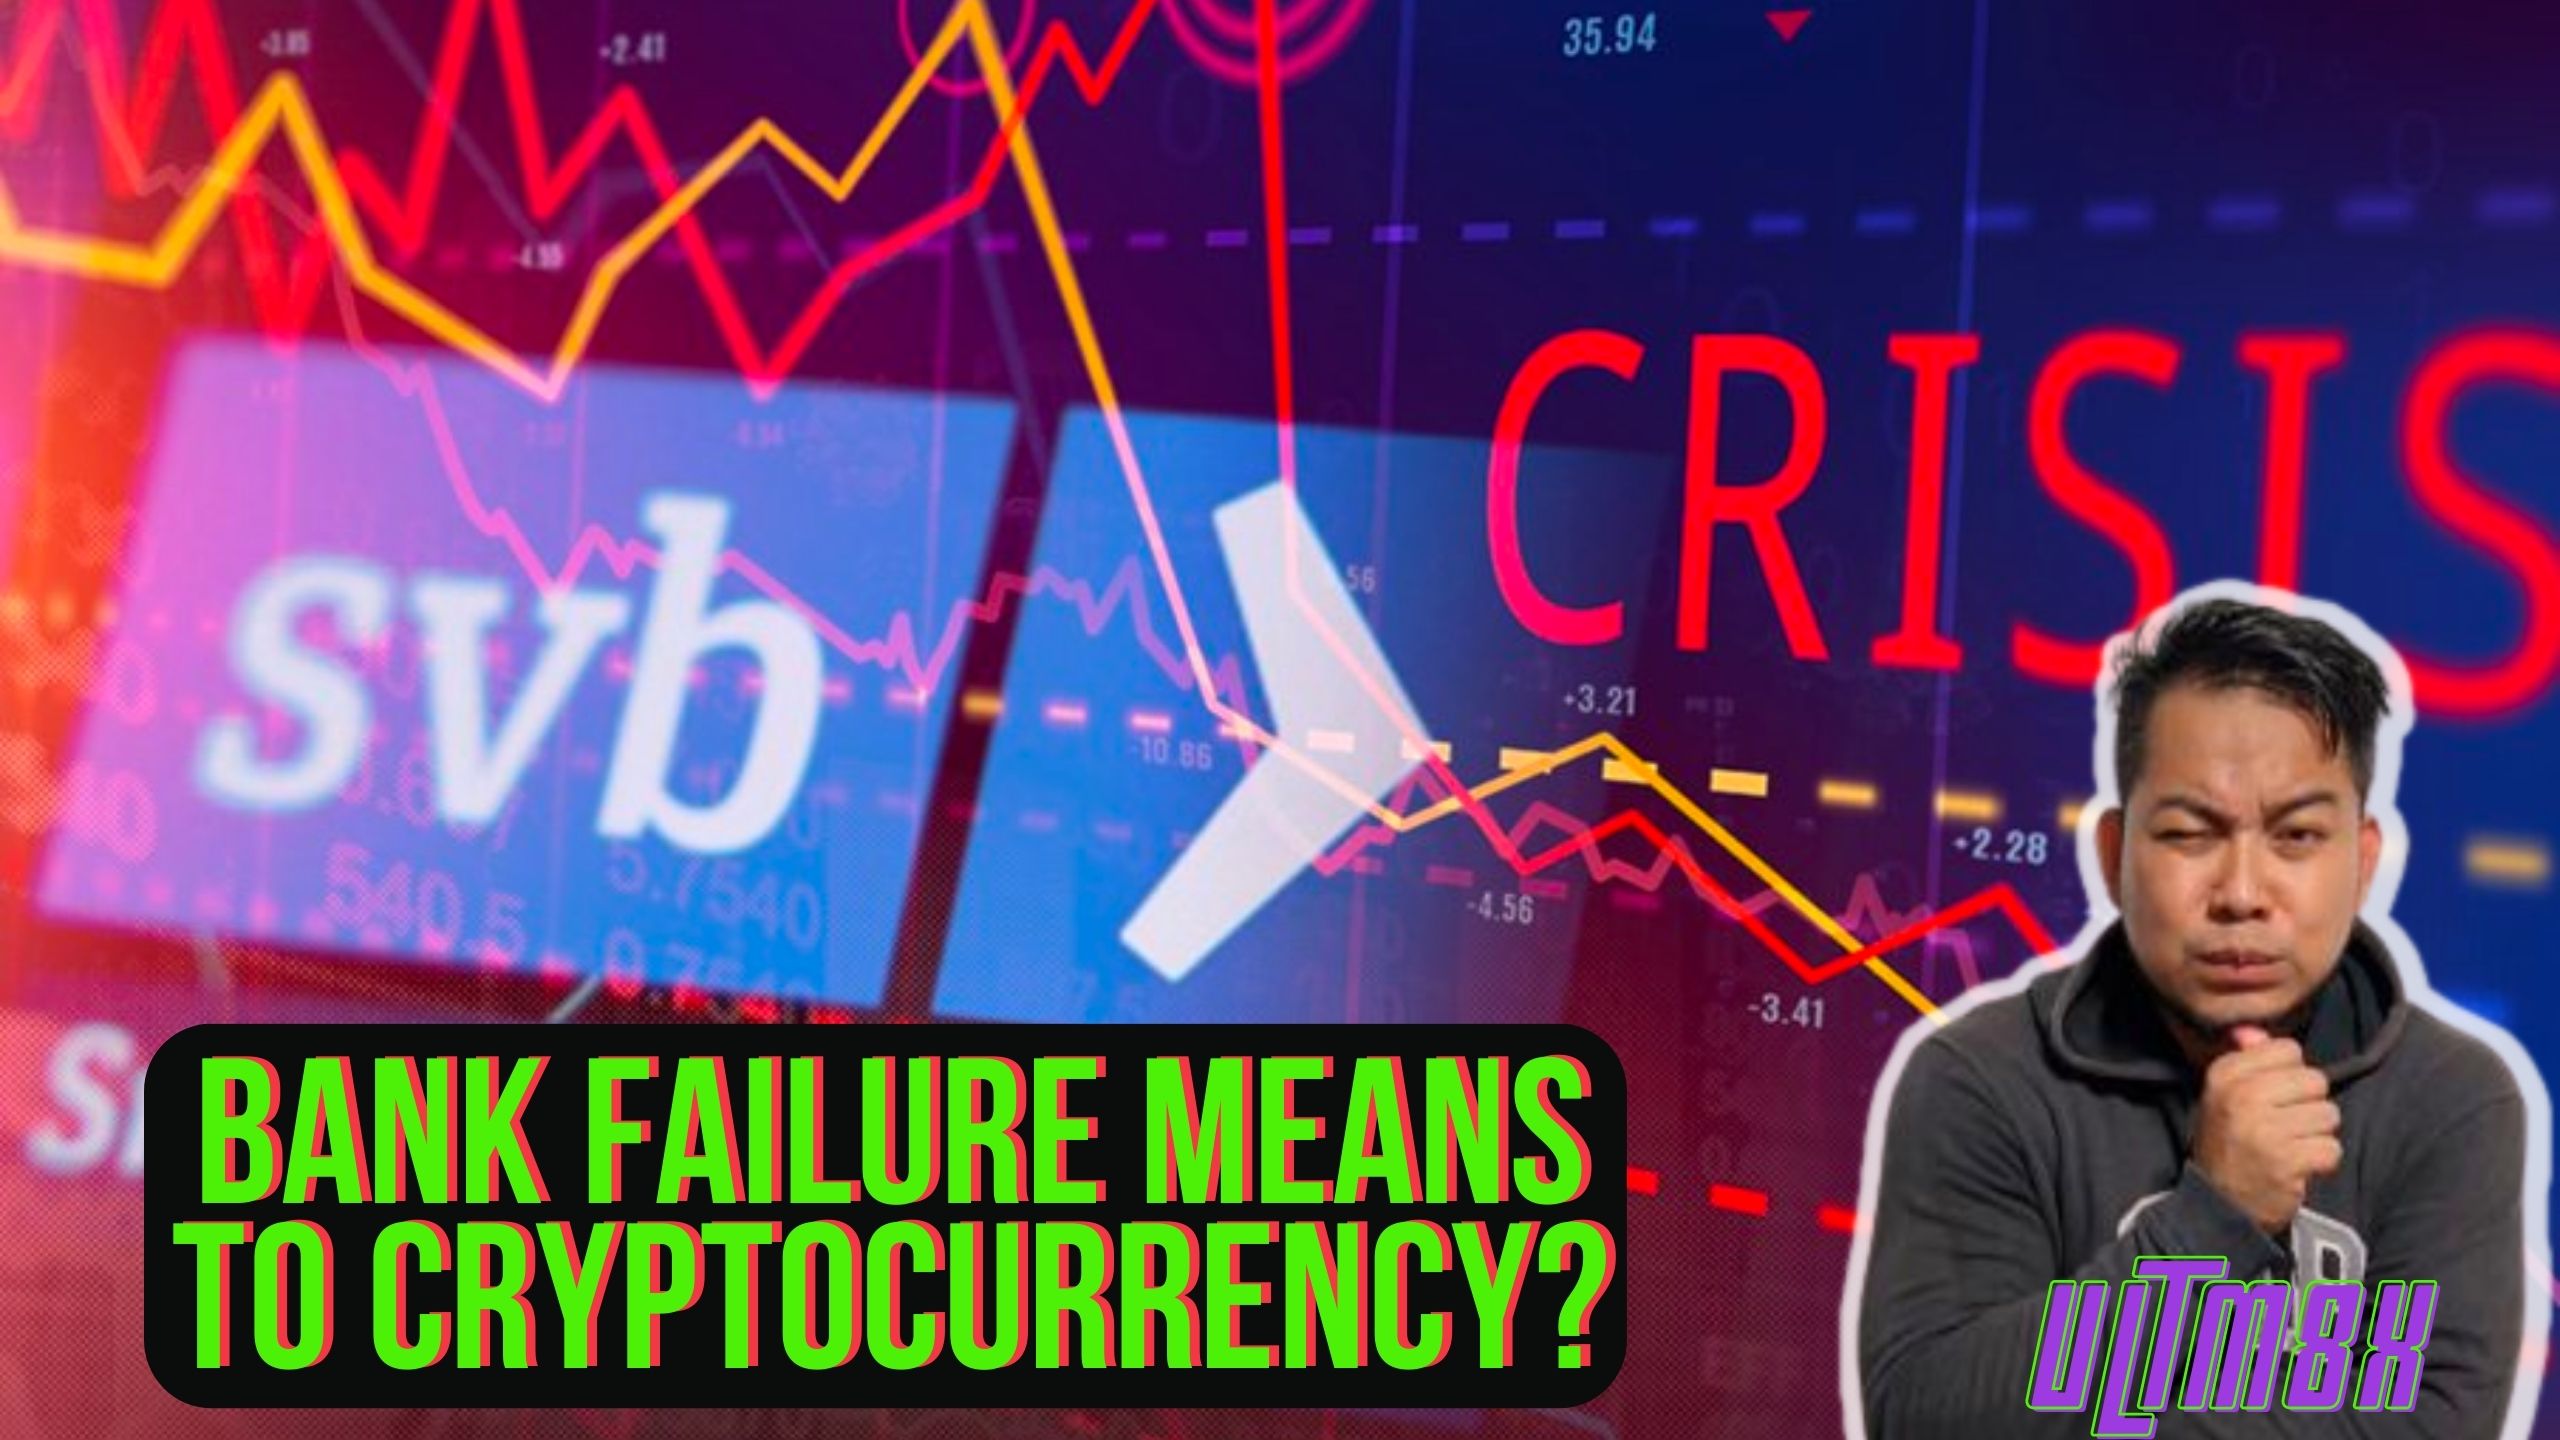 @ultm8x/bank-failure-means-to-cryptocurrency